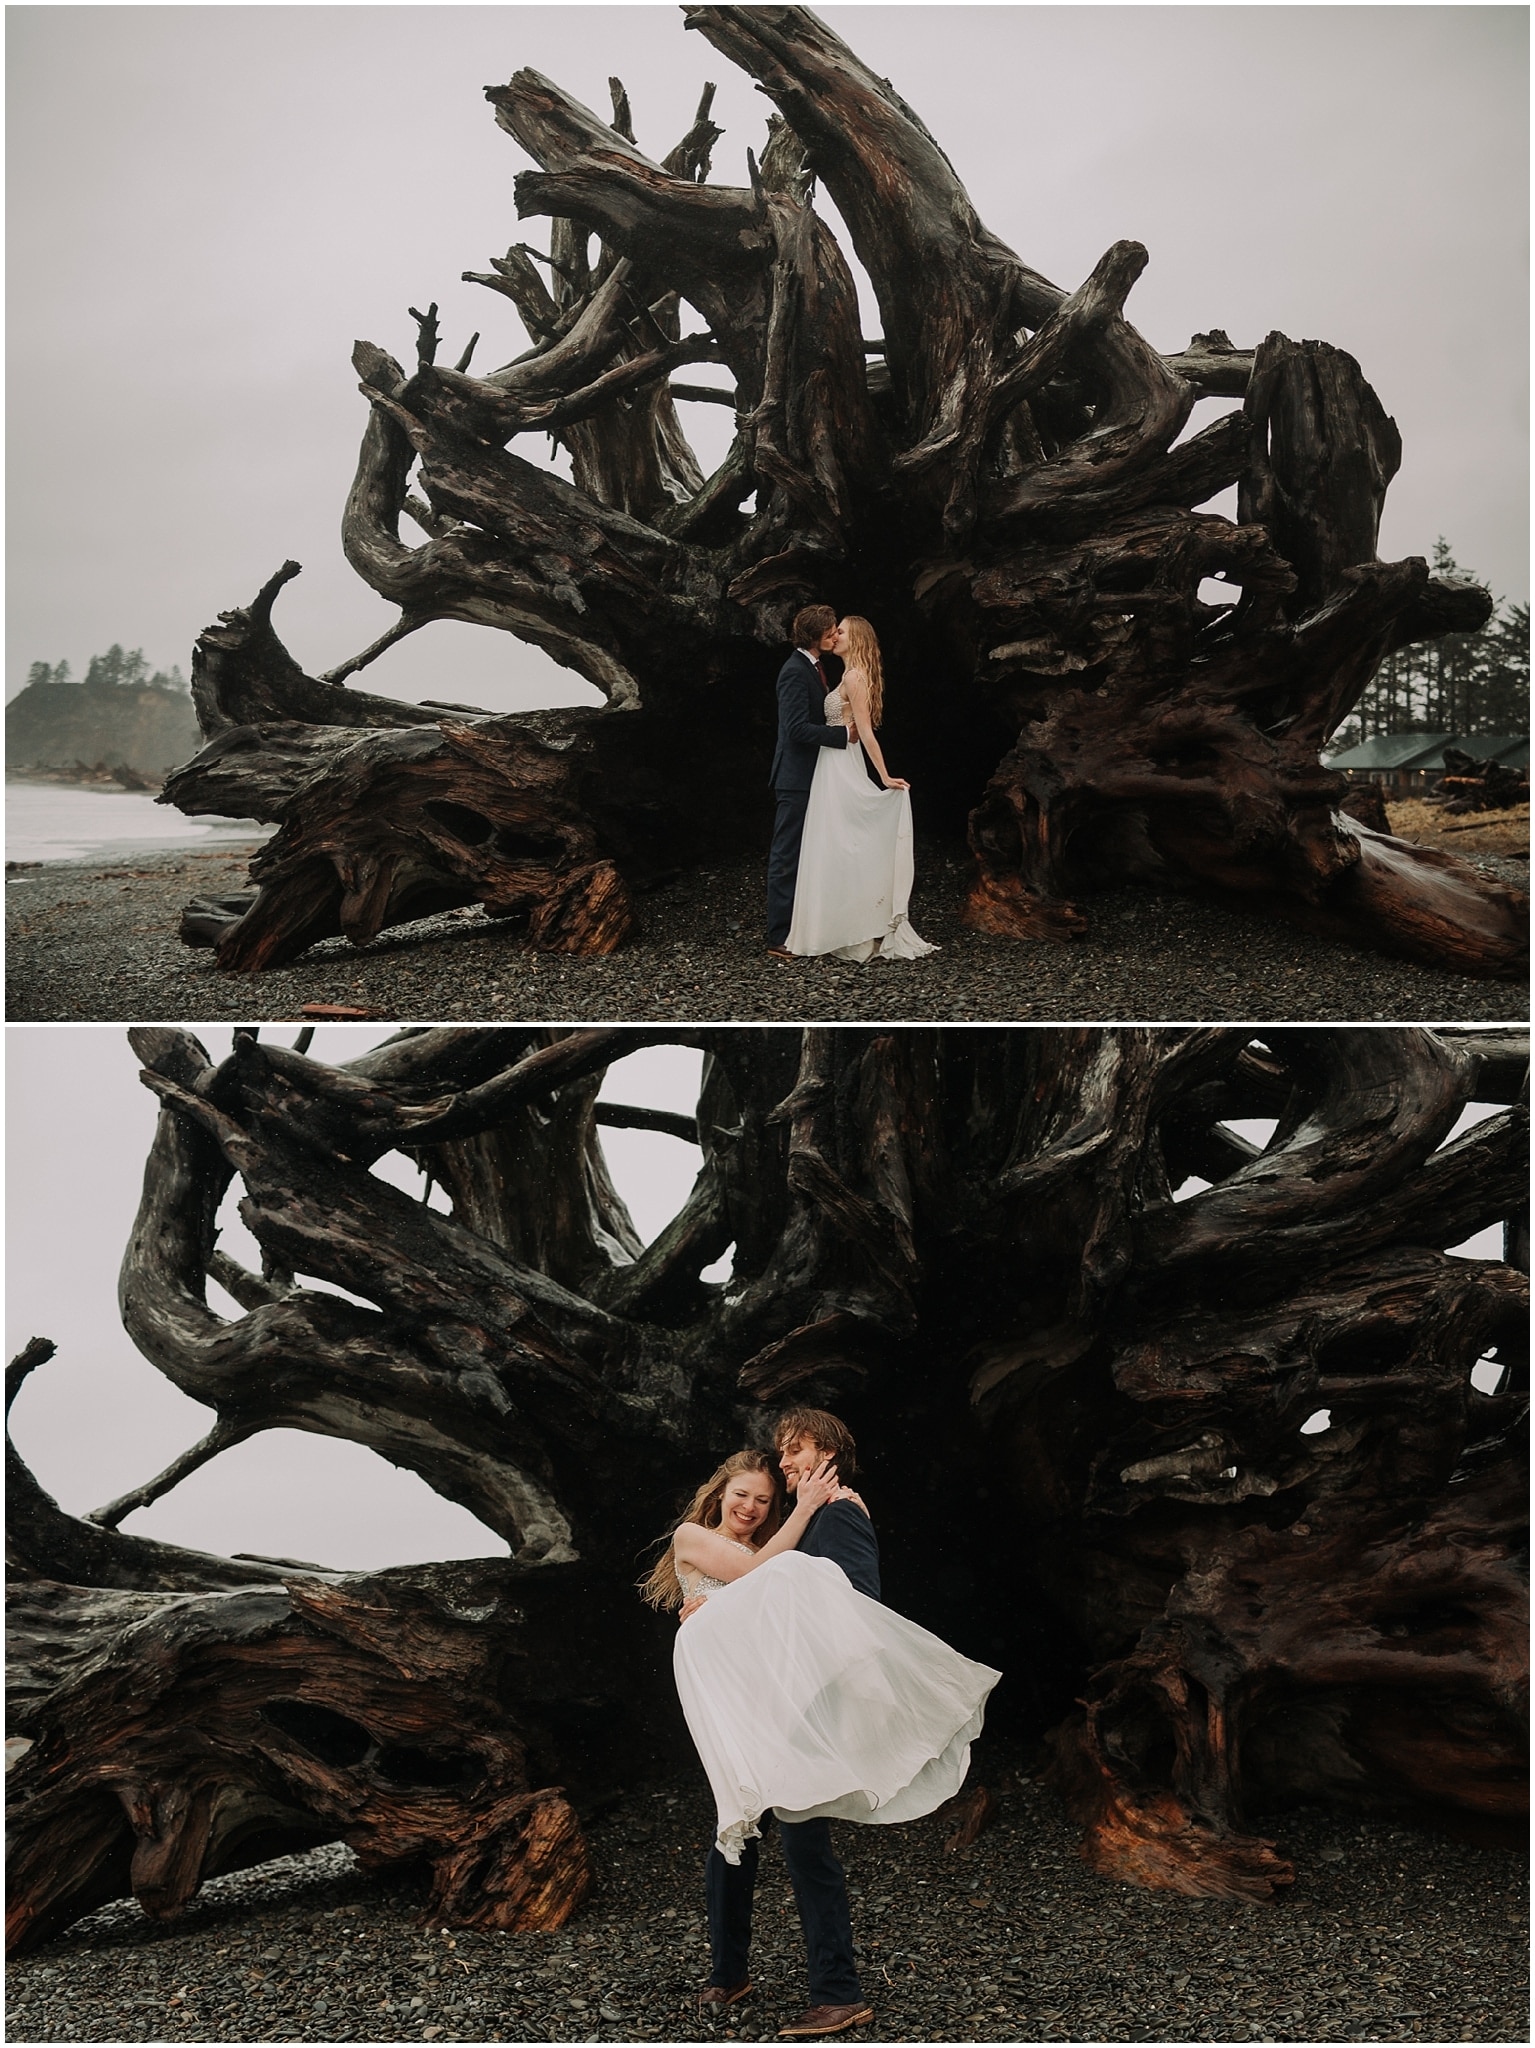 Olympic National Forest Engagement Photos, Olympic National Park Engagement Photos, Washington Engagement Photographer, La Push Beach engagement photos, Washington elopement photographer, Best elopement photographers in Washington, Best Washington engagement photographers, First Beach LaPush, beach Engagement photos, adventurous Engagement session, Rainy day elopement, Olympic National Park La Push, adventure elopement photographer, la push beach Washington, second beach la push, second beach la push elopement, la push elopement photographer, la push elopement photography